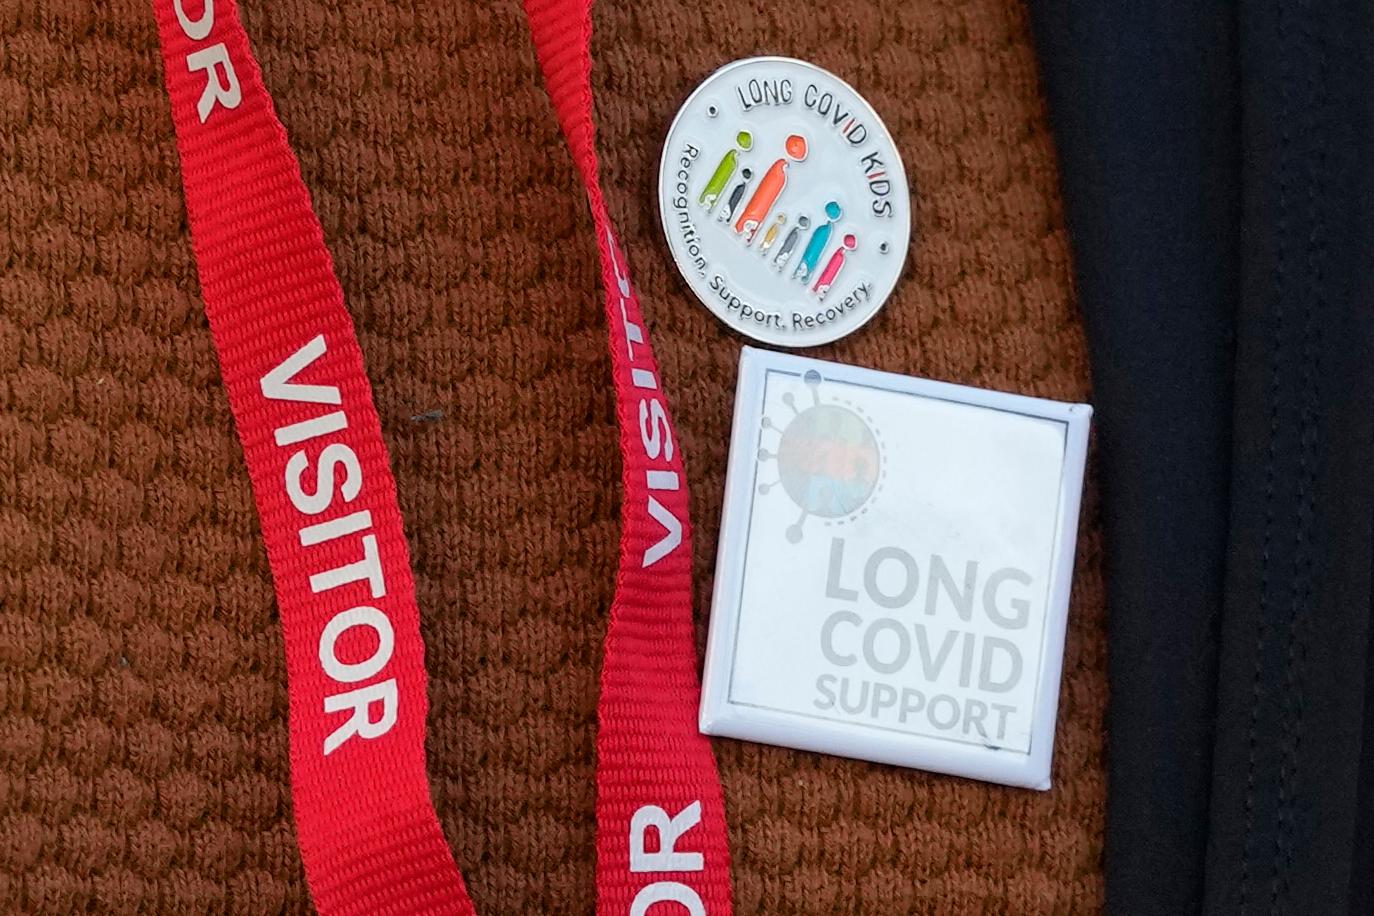 A close-up image of an array of buttons and a lanyard on a person's orange knit shirt. The lanyard is red with "VISITOR" on it. Both buttons are in support of long COVID treatment.